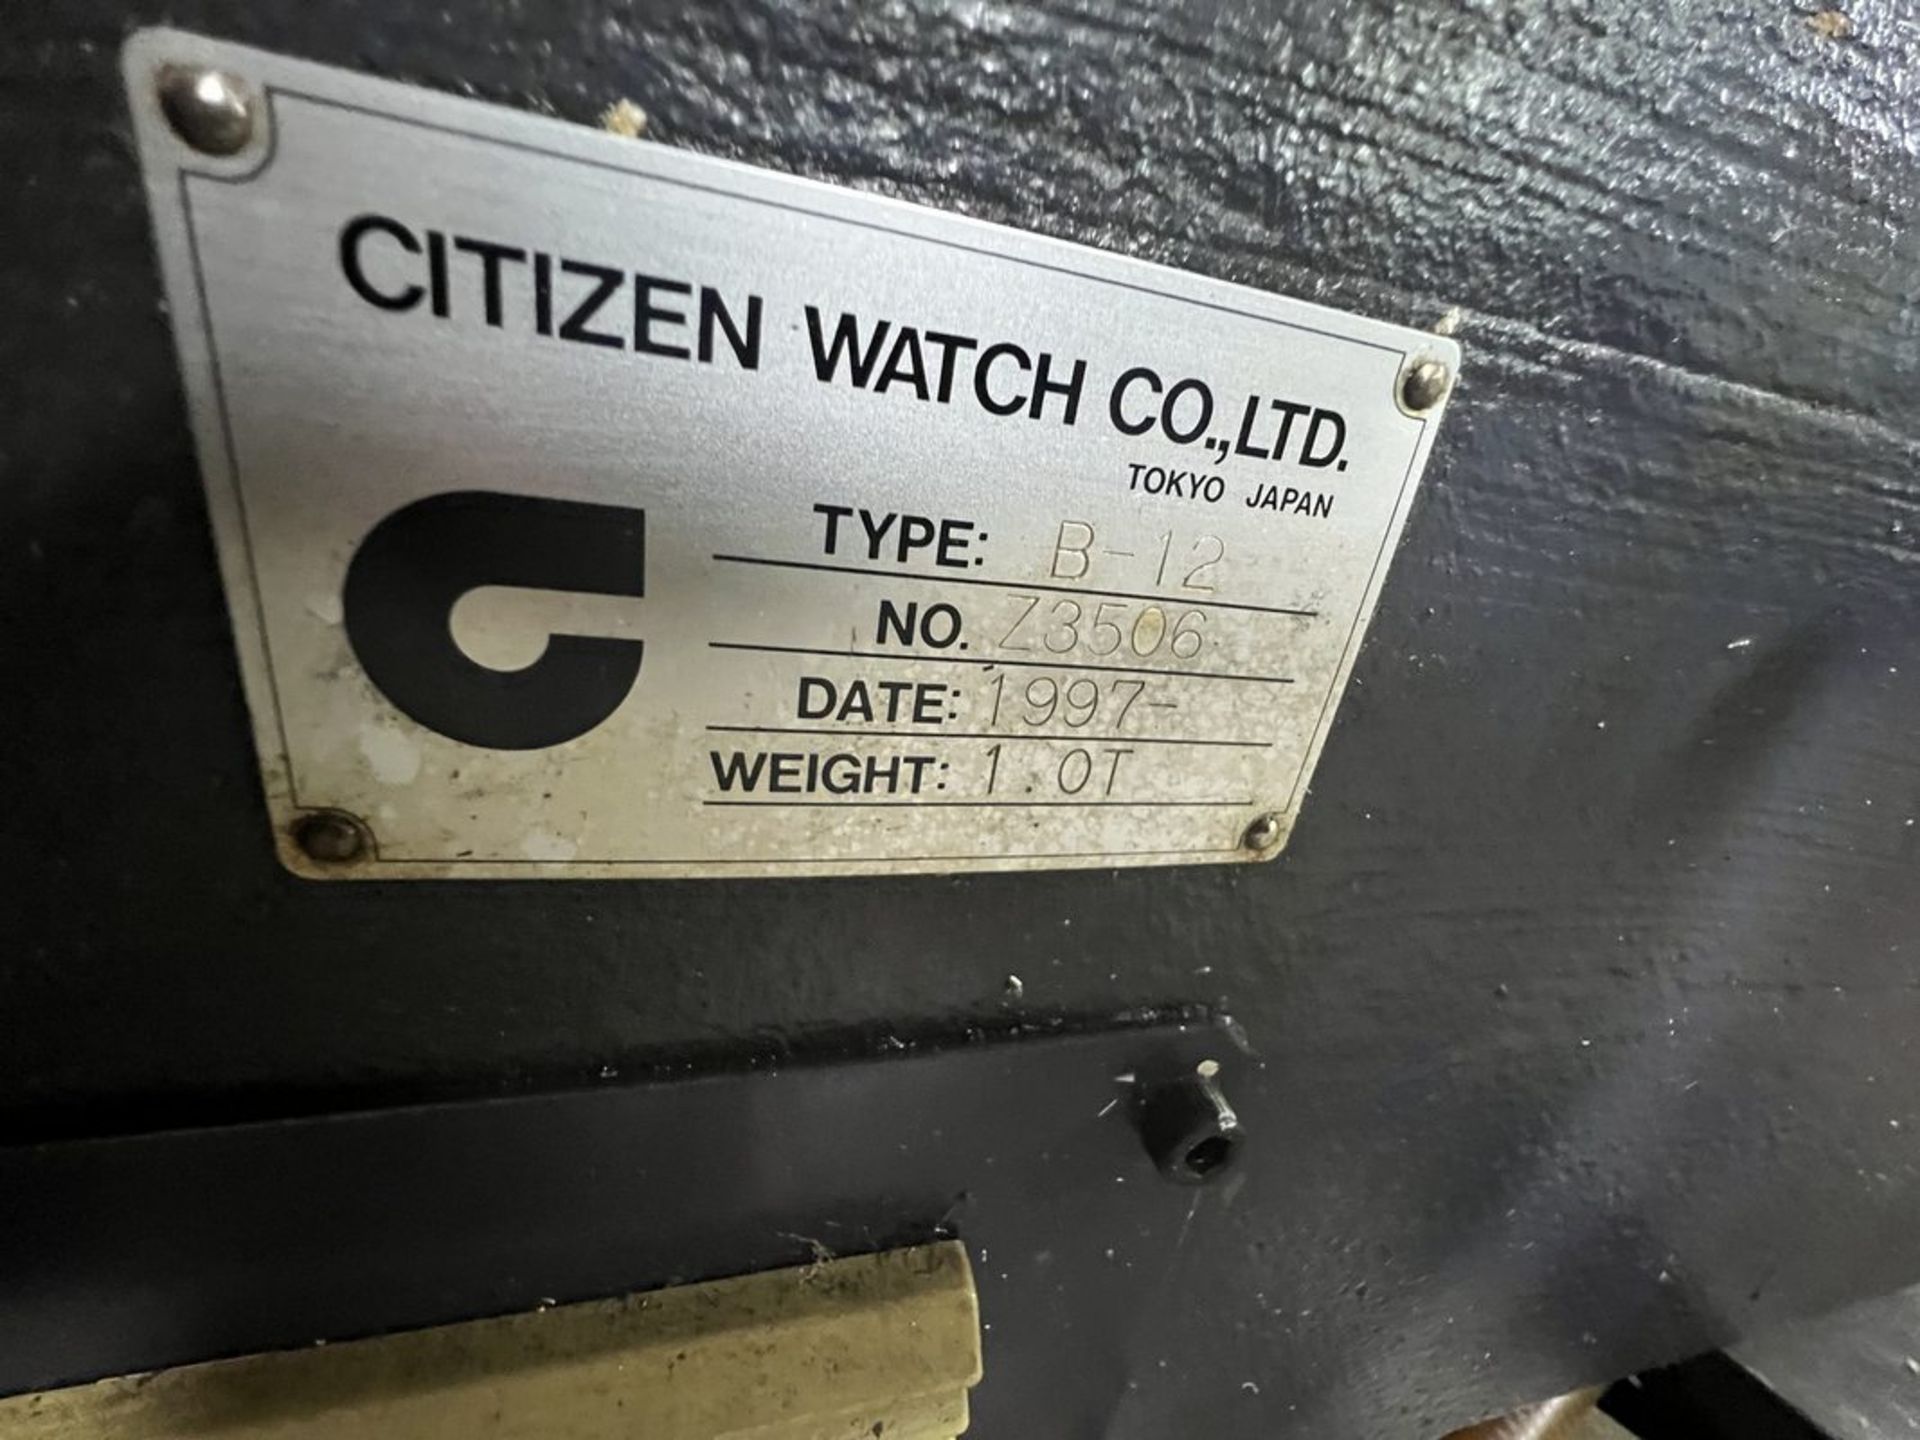 Citizen B-12 Type I, 12 mm (1/2") 3-Axis CNC Swiss Lathe, S/N Z3506, 1997 - Image 13 of 14